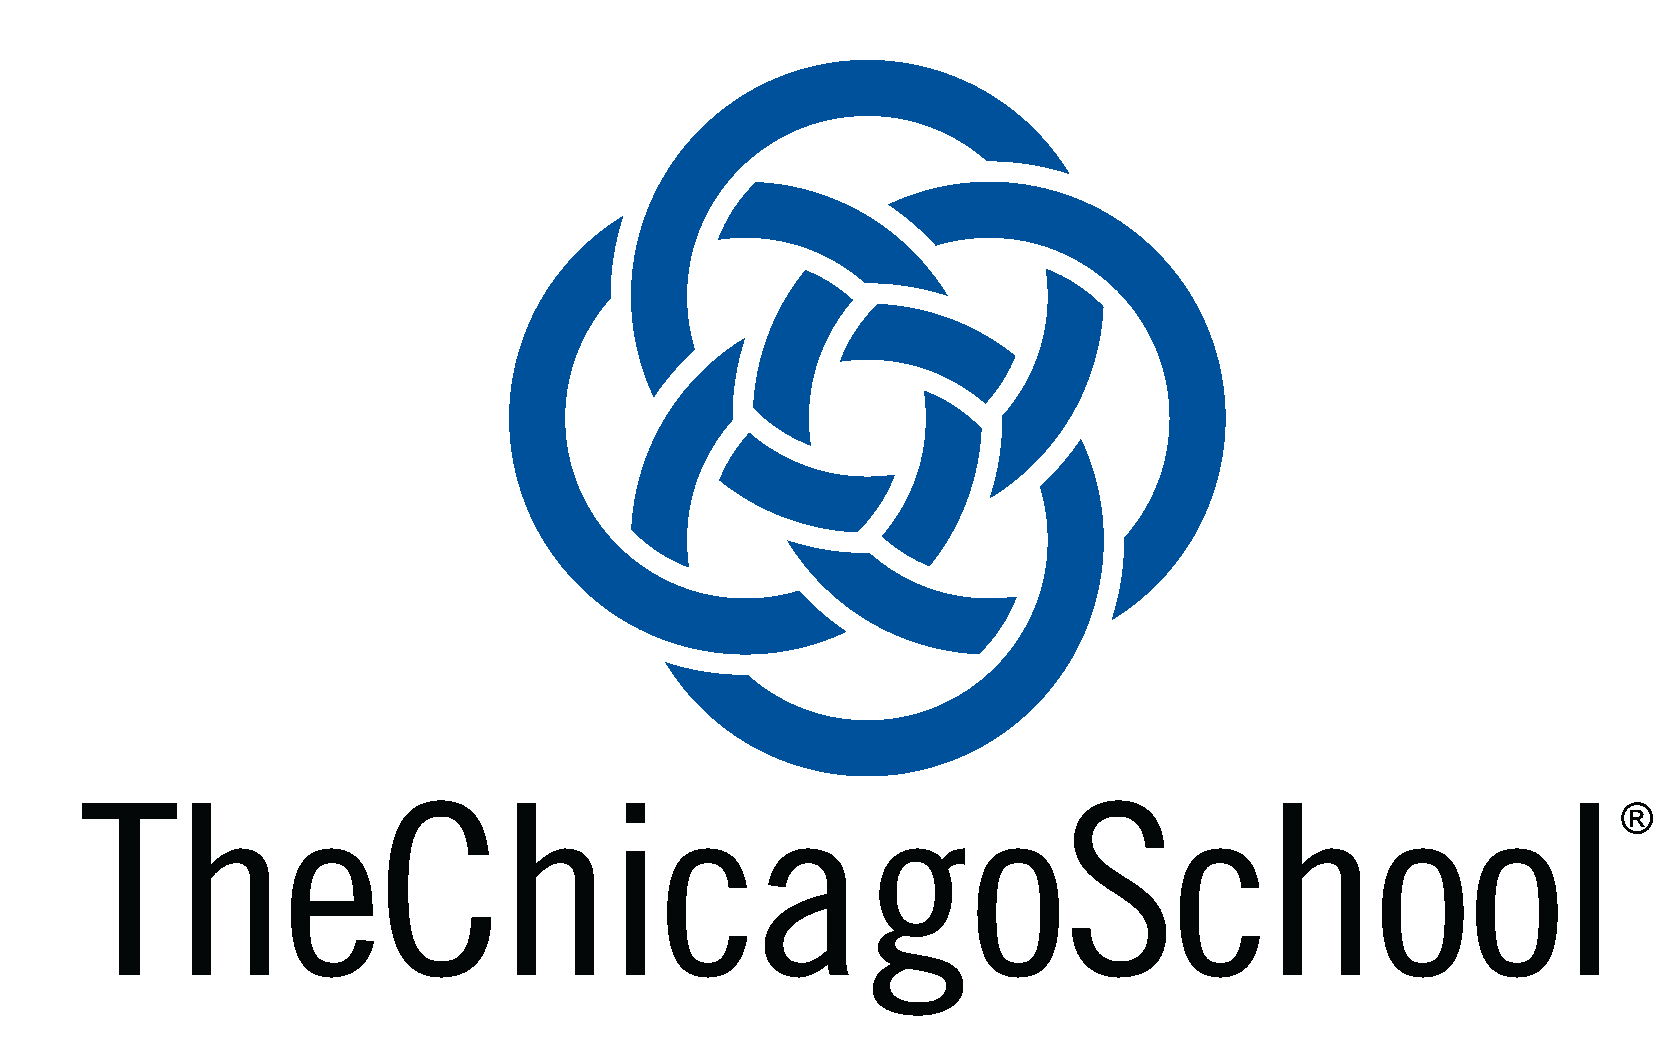 Vertical logo for The Chicago School